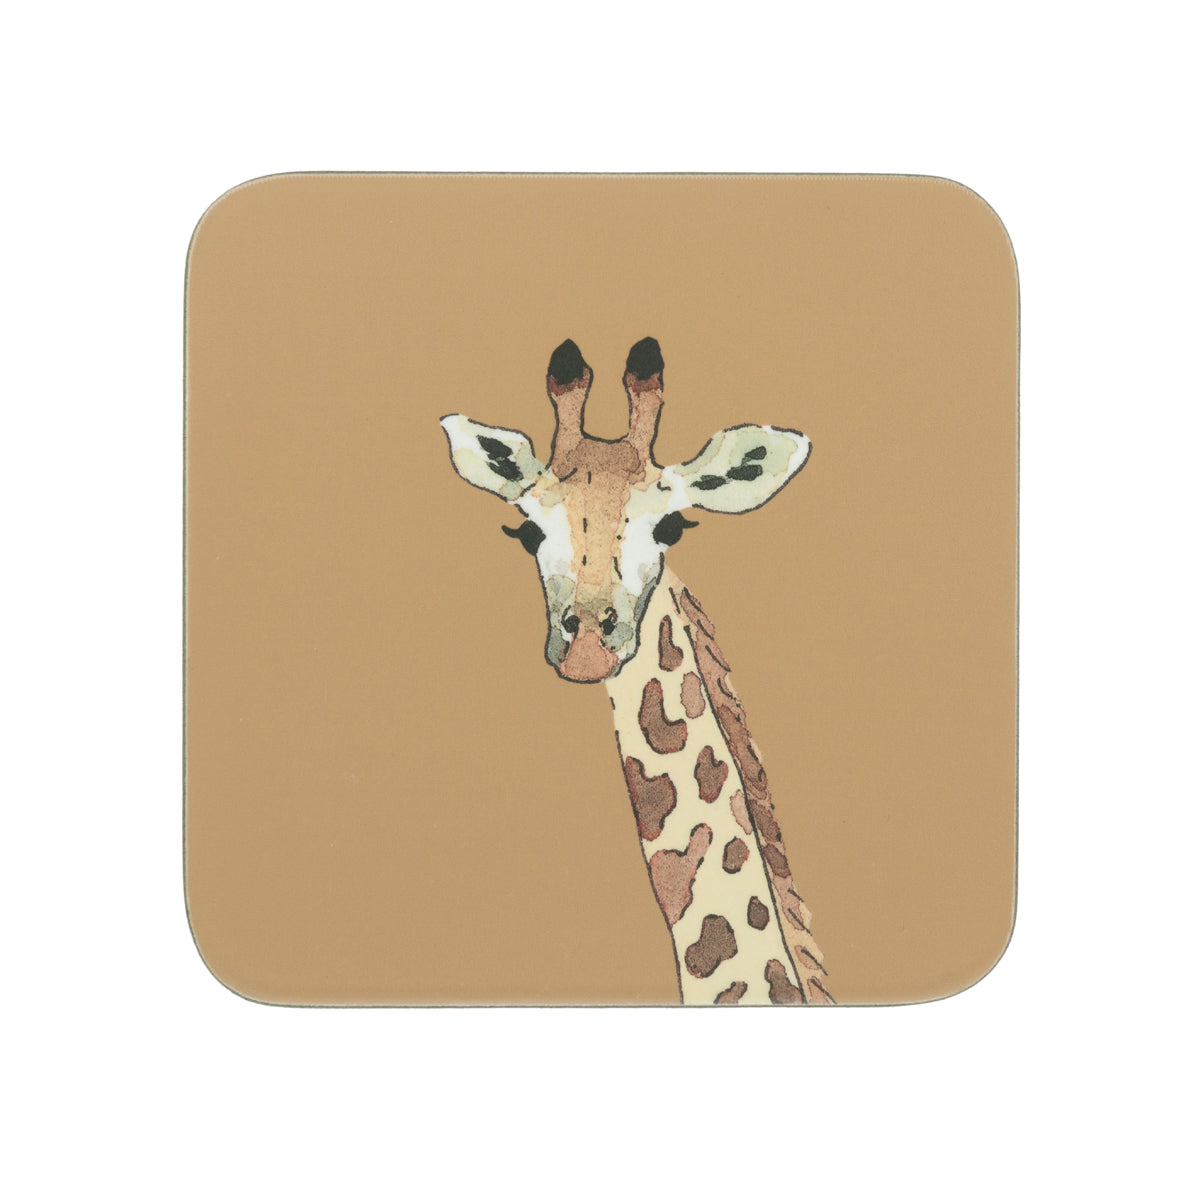 Giraffe Table Coasters (Set of 4) by Sophie Allport